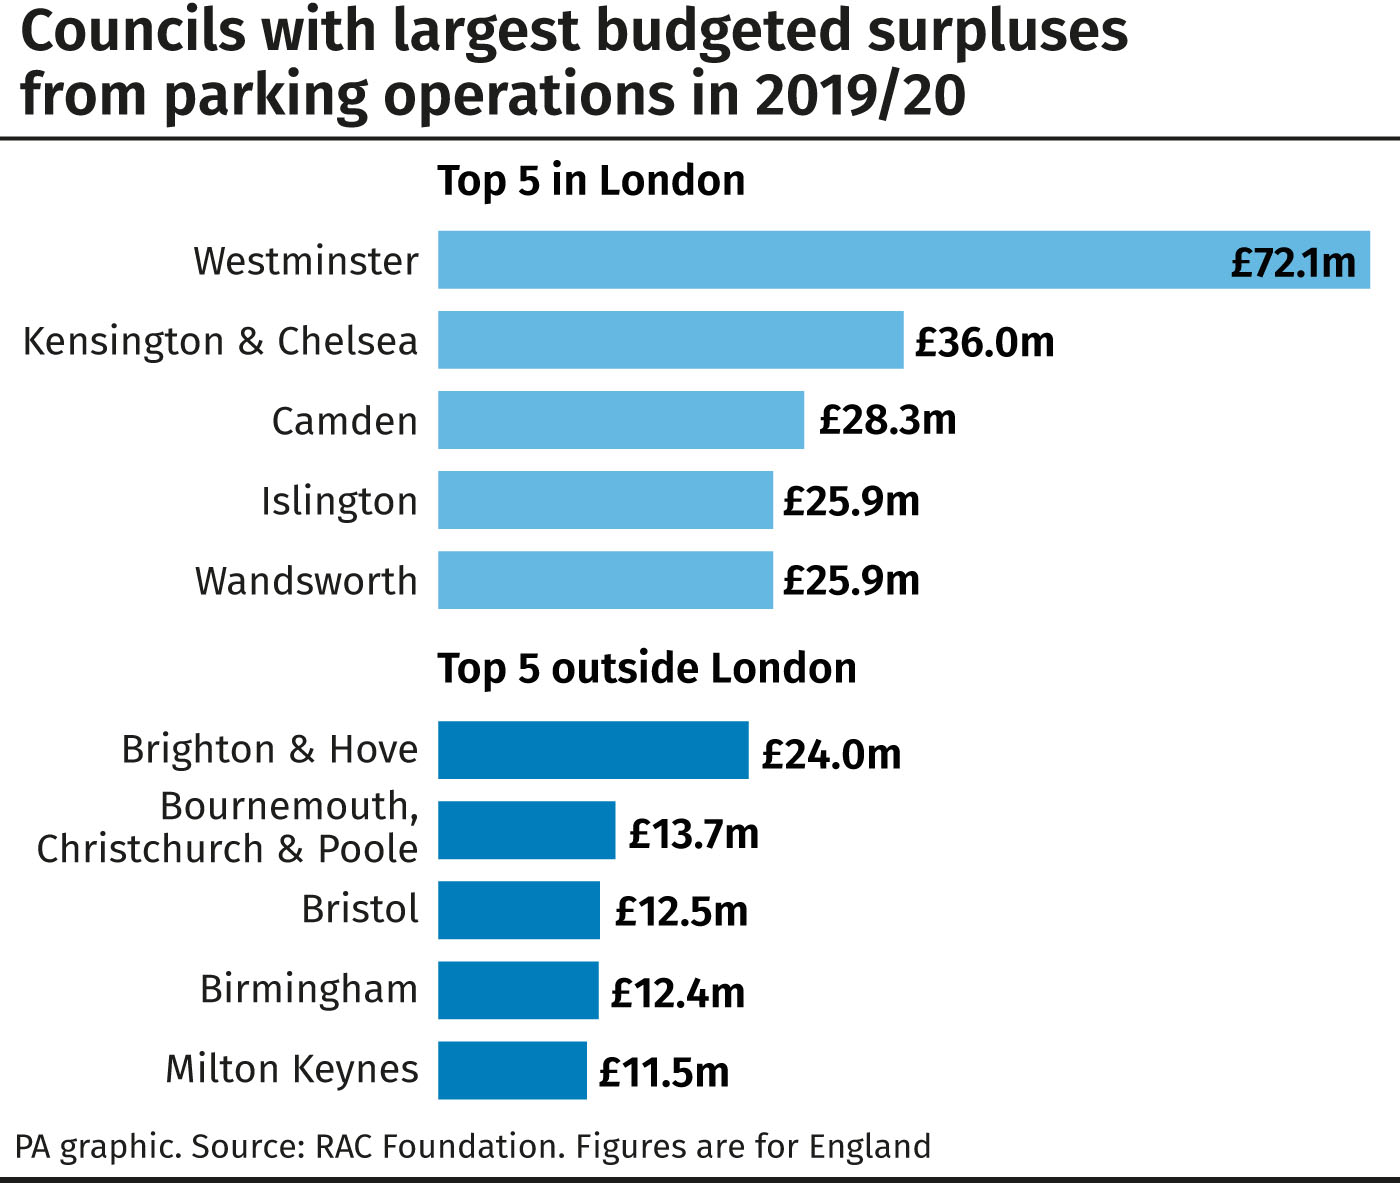 Councils with largest budgeted surpluses from parking operations in 2019/20